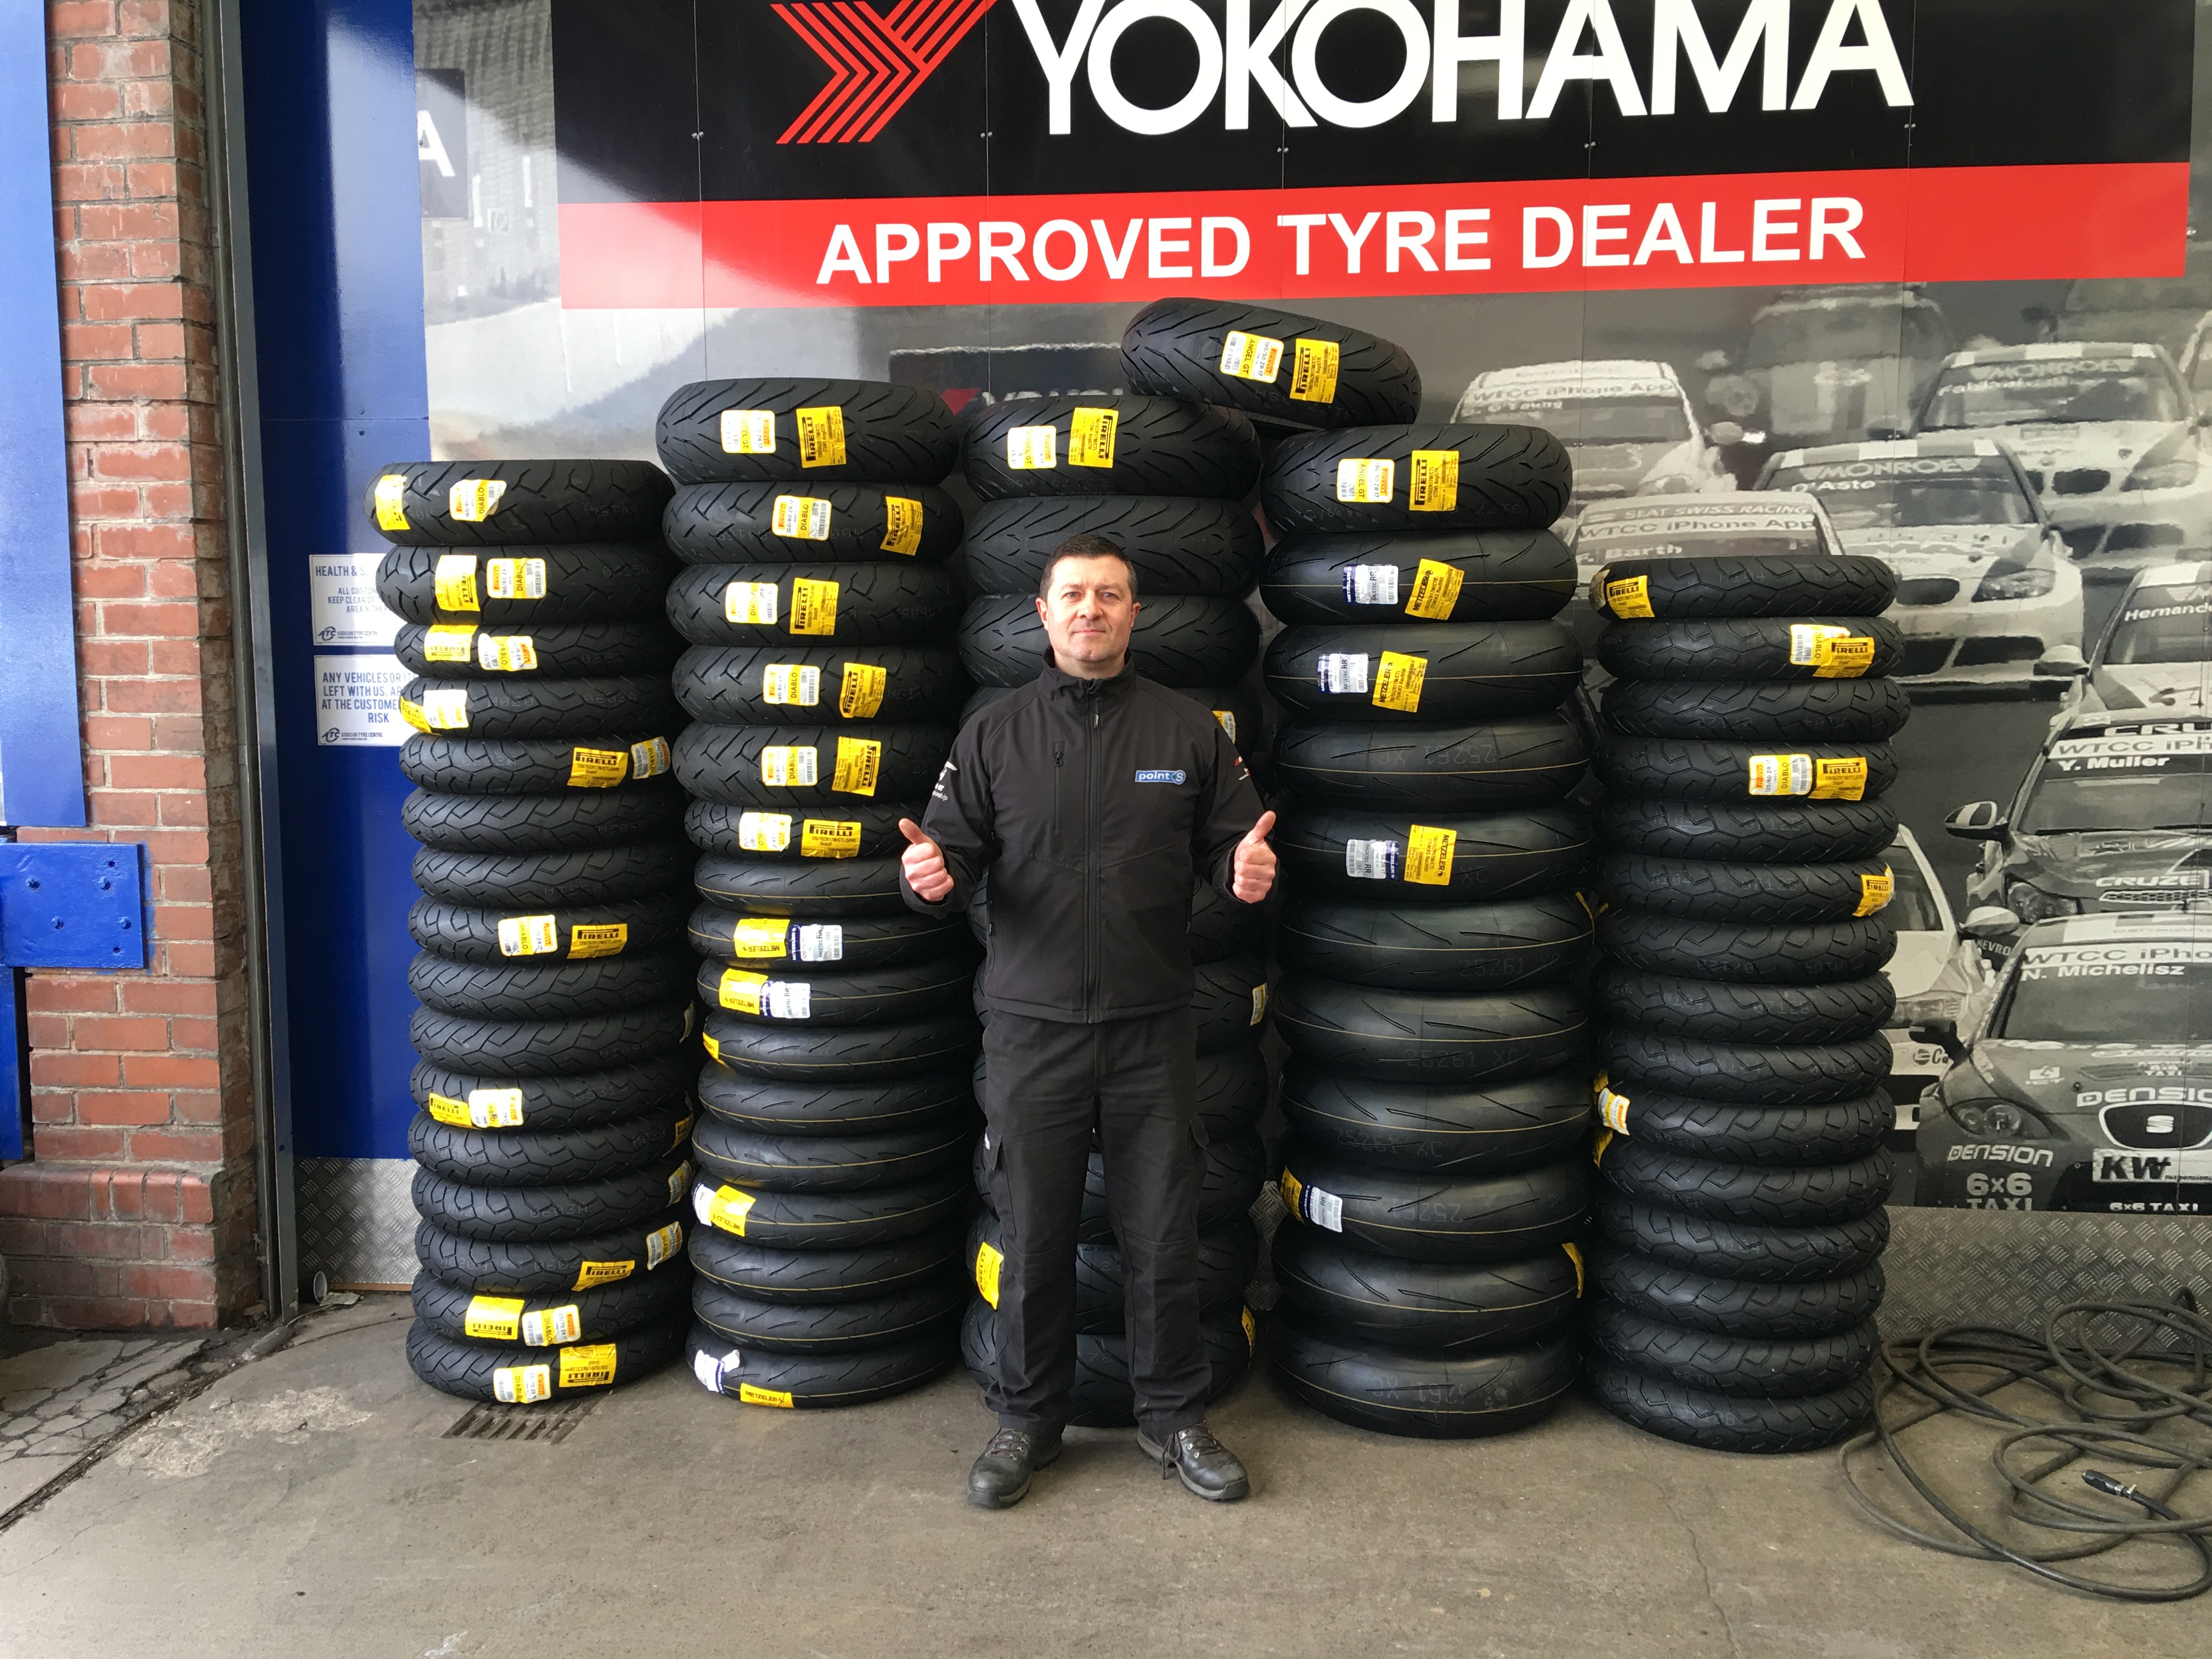 Motorcycle Tyres Sale Now On!